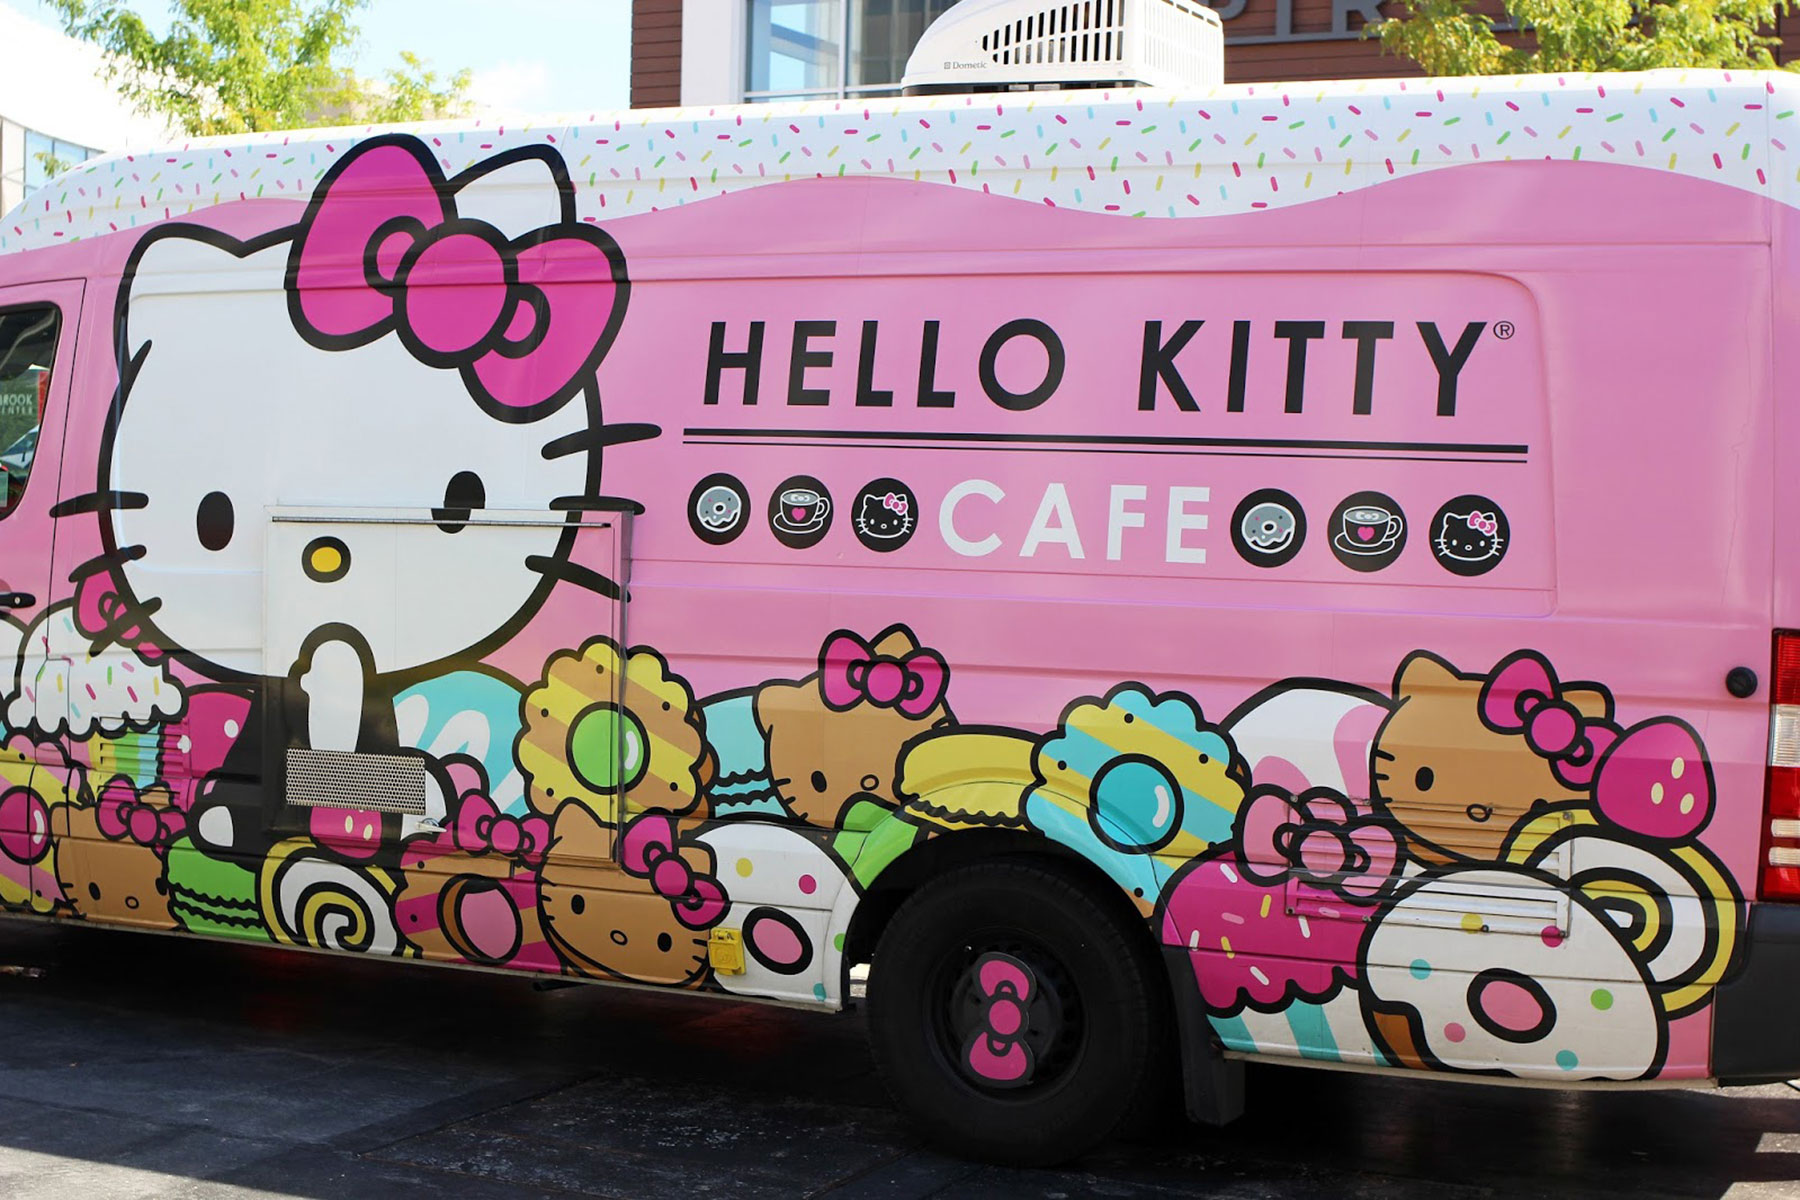 Hello Kitty Cafe Truck to make its first appearance in Milwaukee